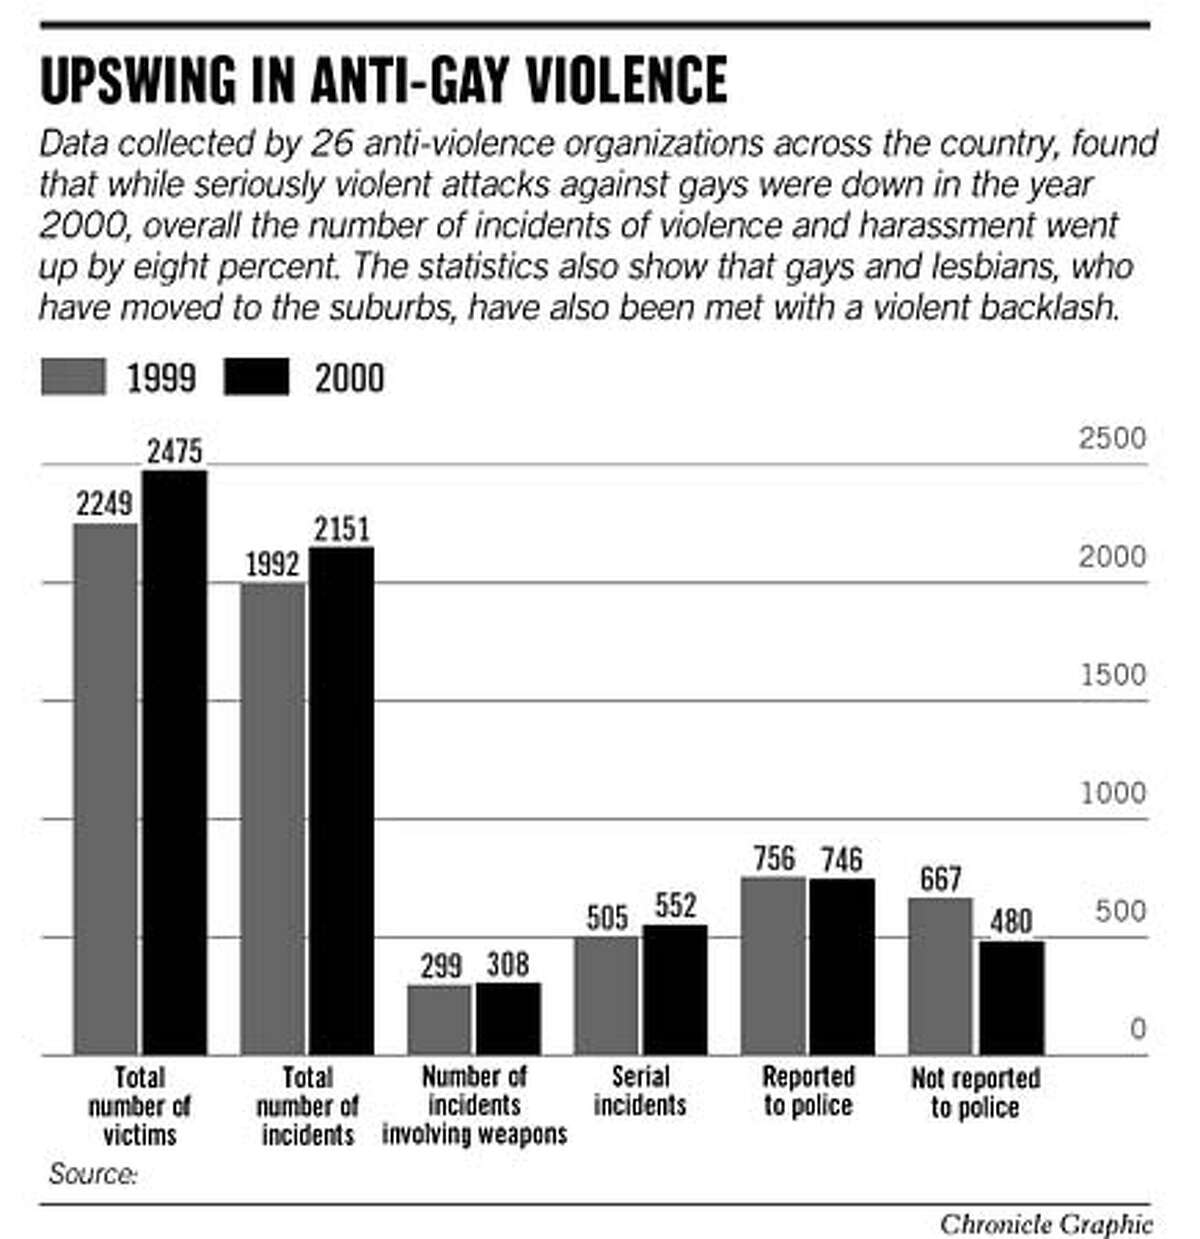 Hate Crimes Against Gays on Rise Across U.S. / But statistics show